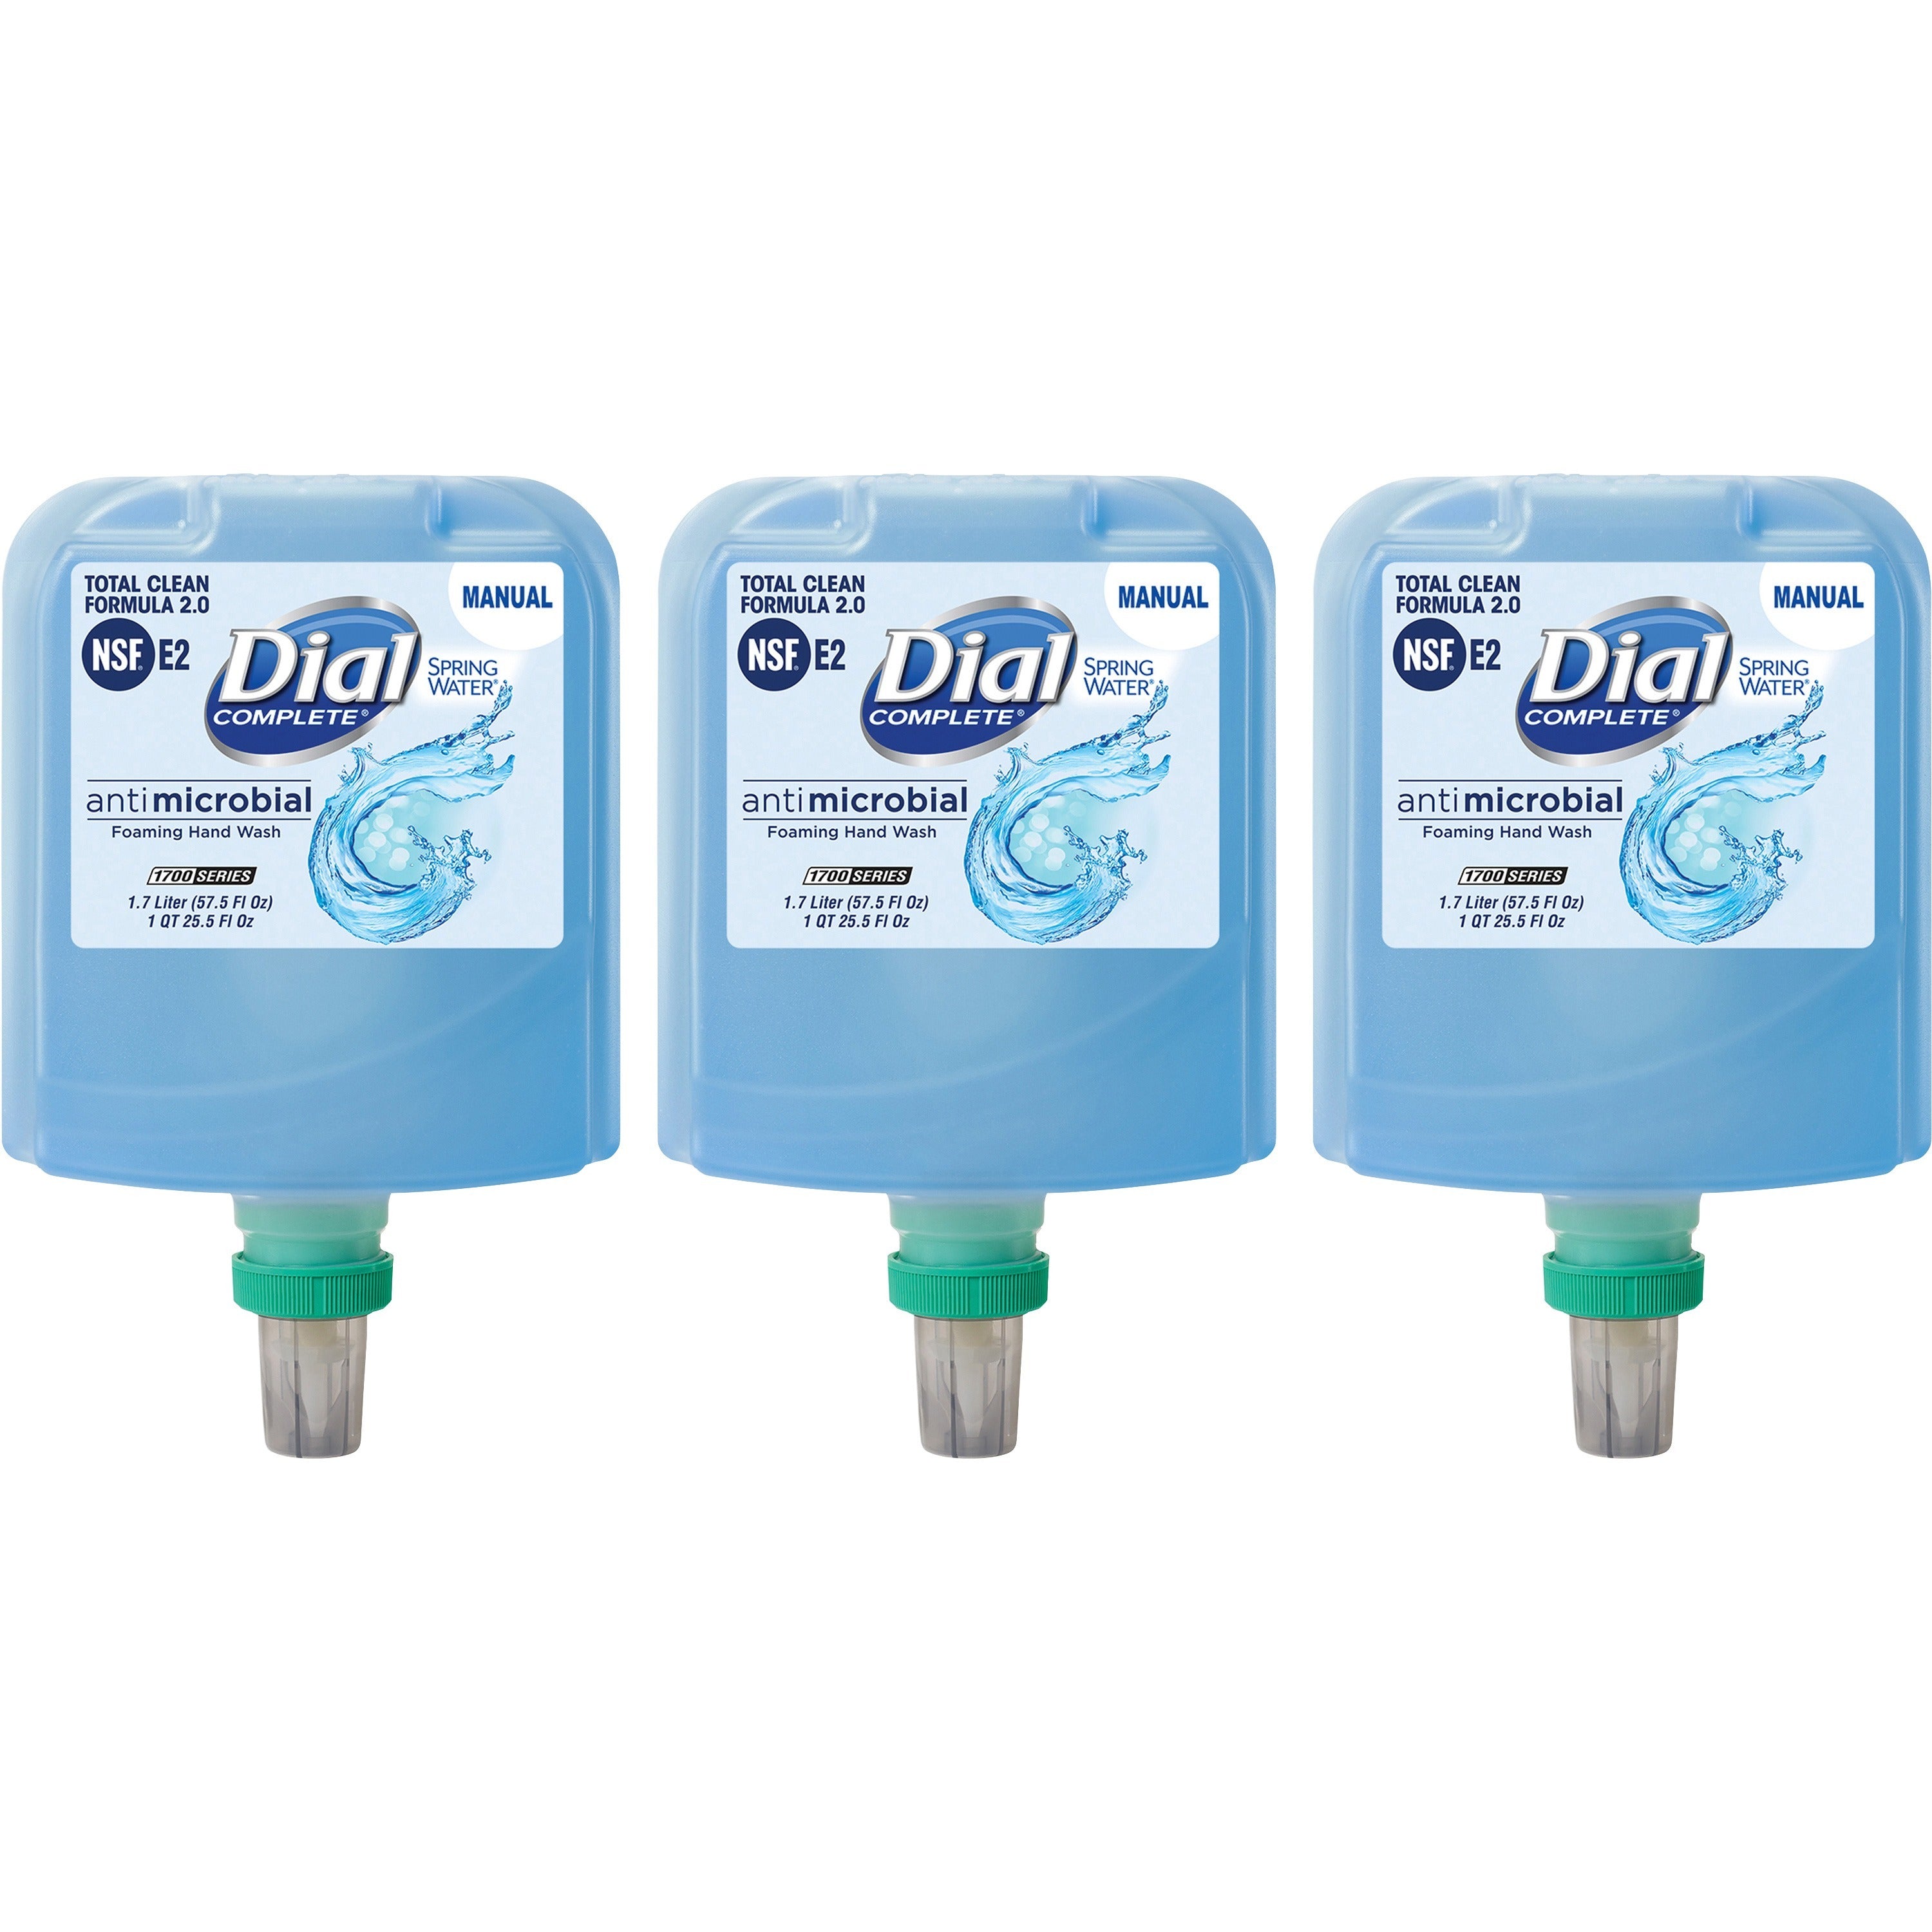 dial-complete-complete-antibacterial-foaming-hand-wash-refill-spring-water-scentfor-575-fl-oz-17005-ml-bacteria-remover-hand-healthcare-school-office-restaurant-daycare-moisturizing-antibacterial-blue-non-drying-3-carton_dia19690ct - 1